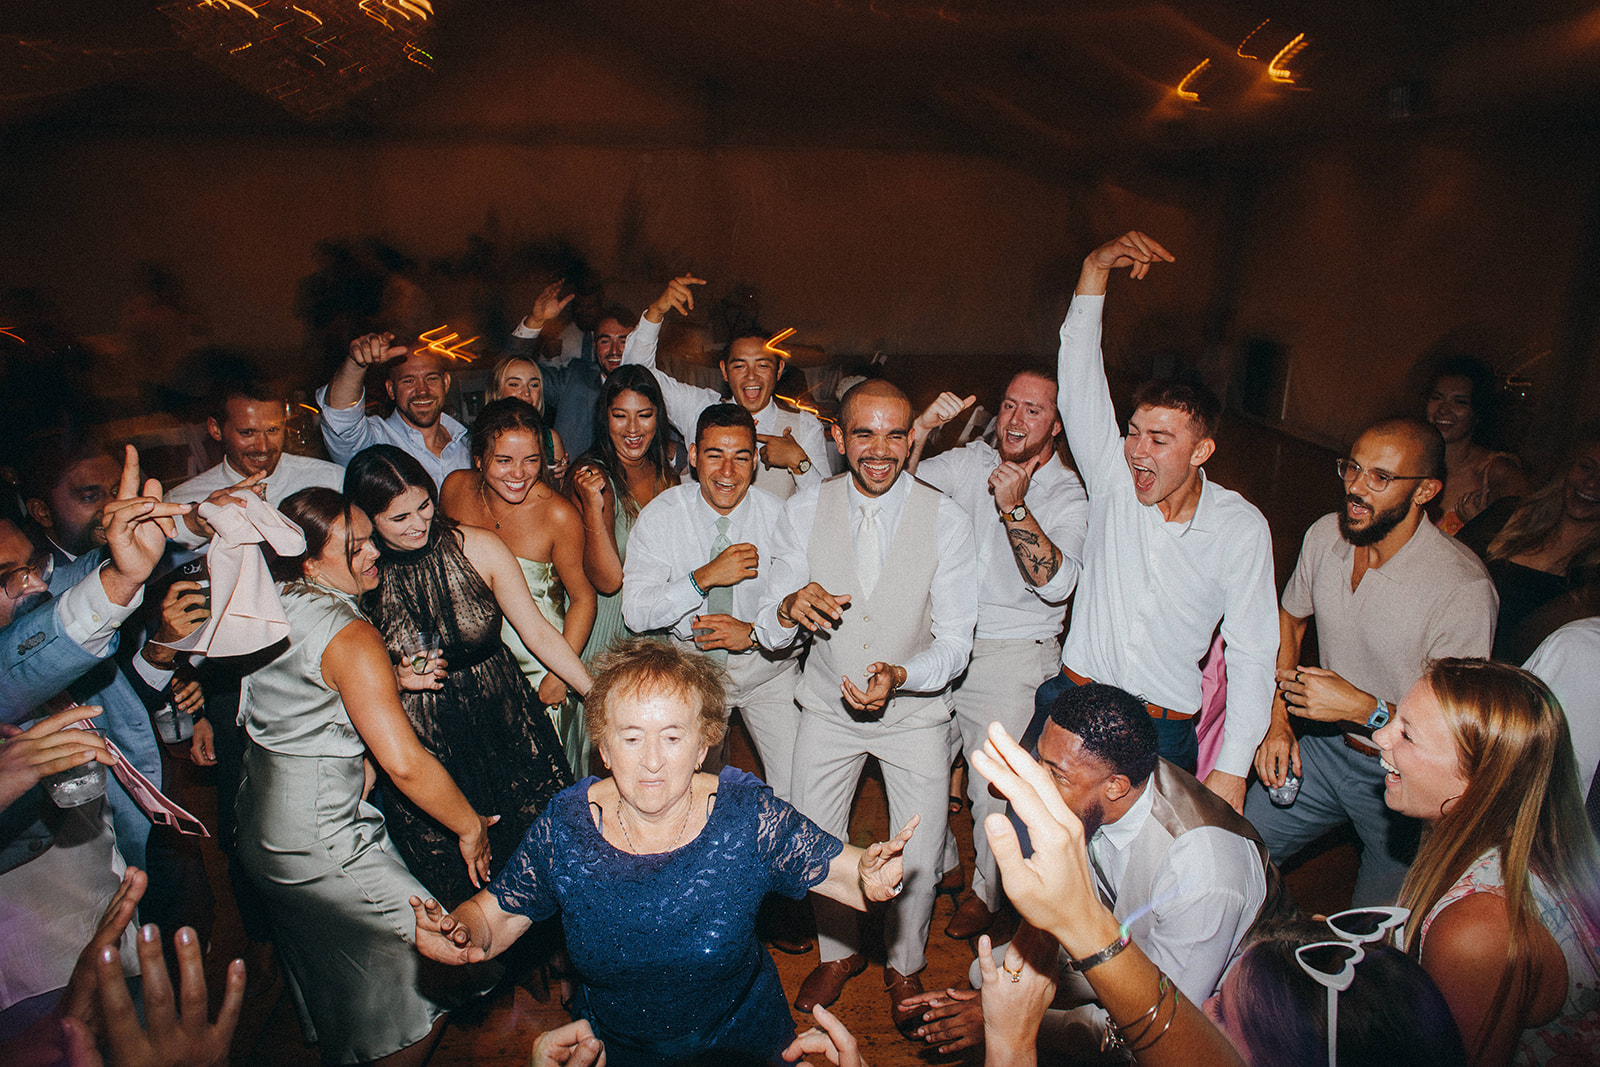 Amazing dancing photos of a grandma and the whole wedding party during a reception at Crosley Estate 